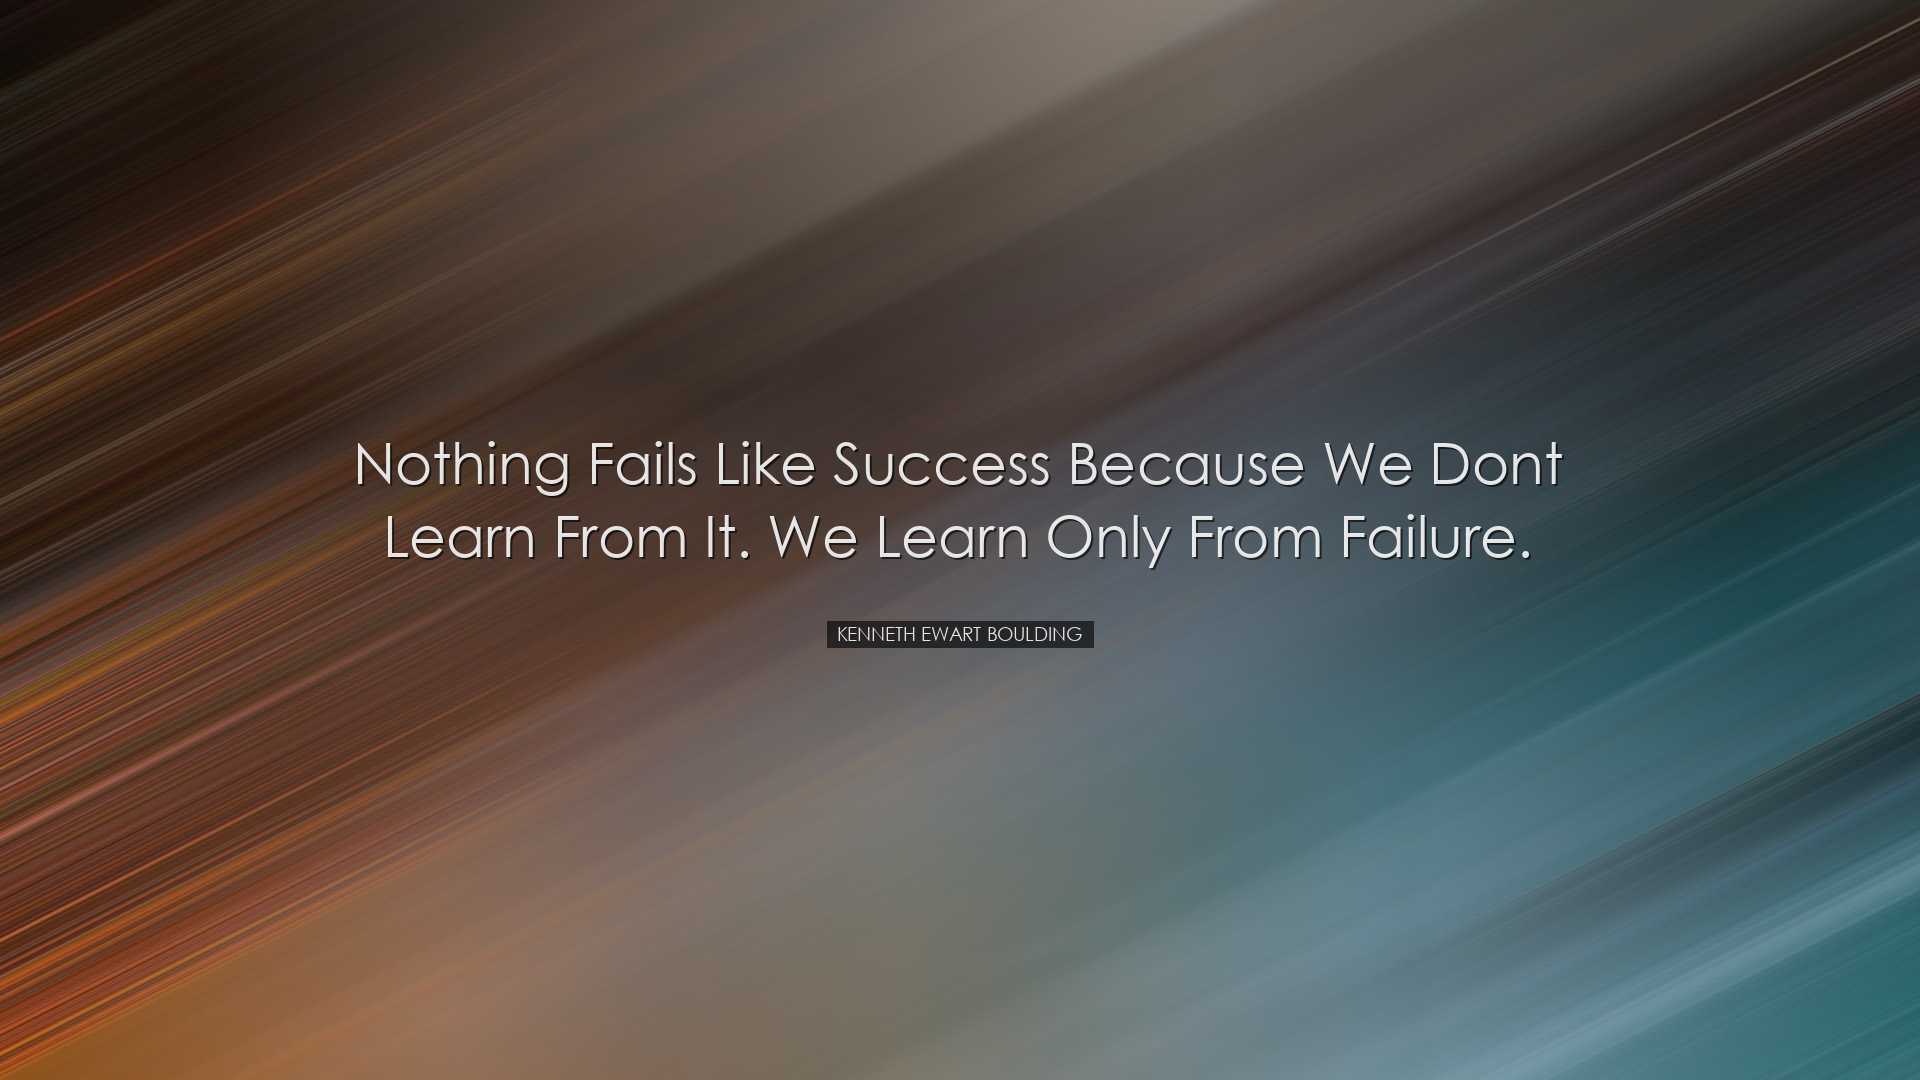 Nothing fails like success because we dont learn from it. We learn